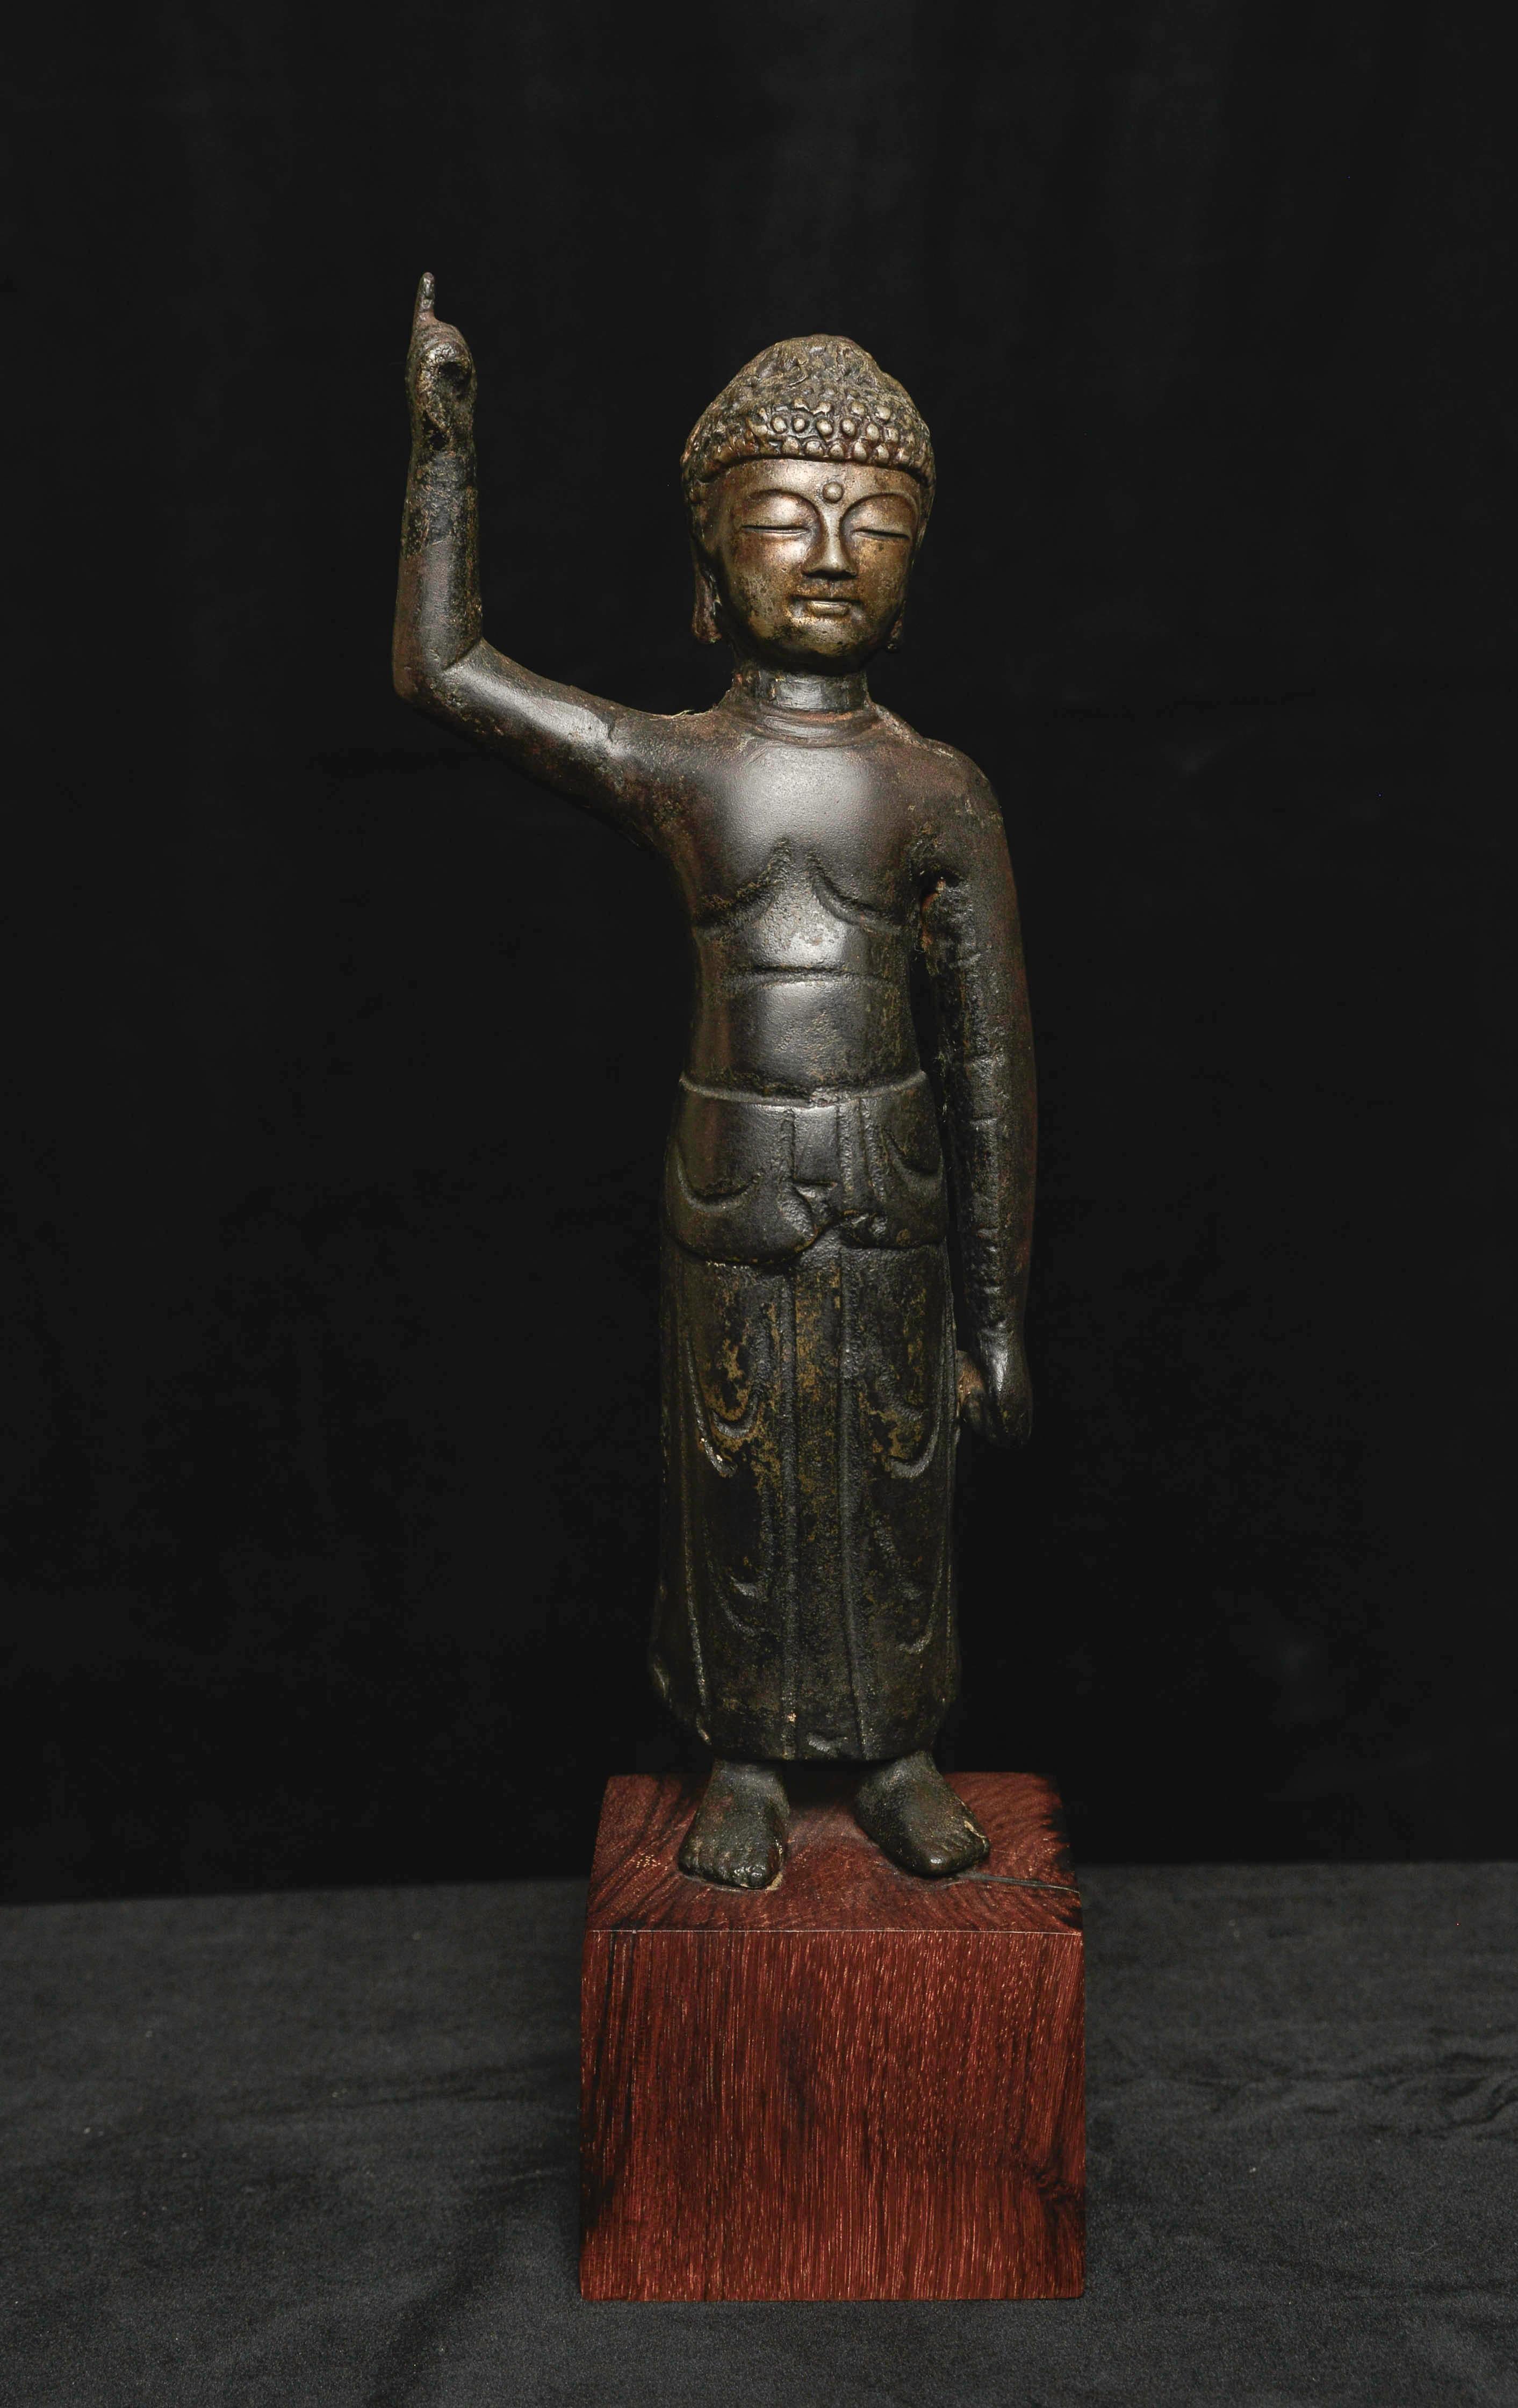 16/17thC Korean Baby Buddha pointing to heaven and earth. It is dated to the 16C. Great condition only condition issue is the loss of one index finger, which is common for this form of baby Buddha. The size is quite substantial at 11.75